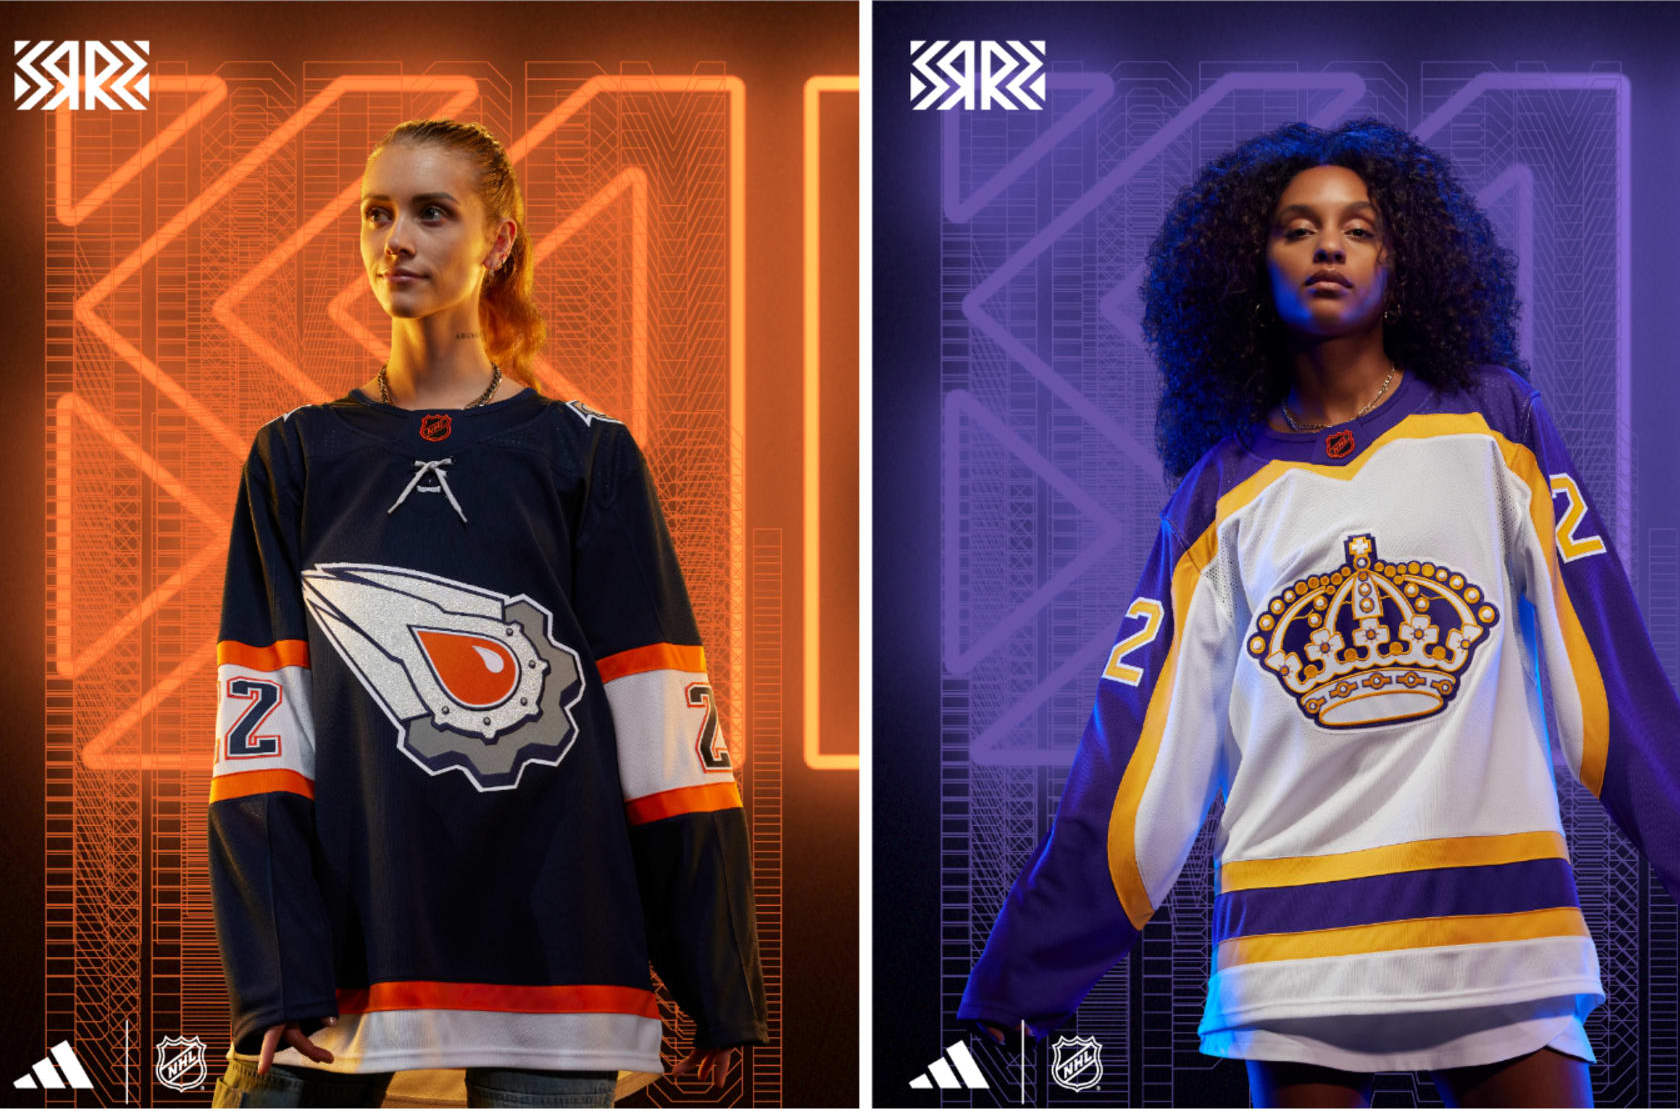 NHL 21 adds Reverse Retros and they are looking as beautiful as